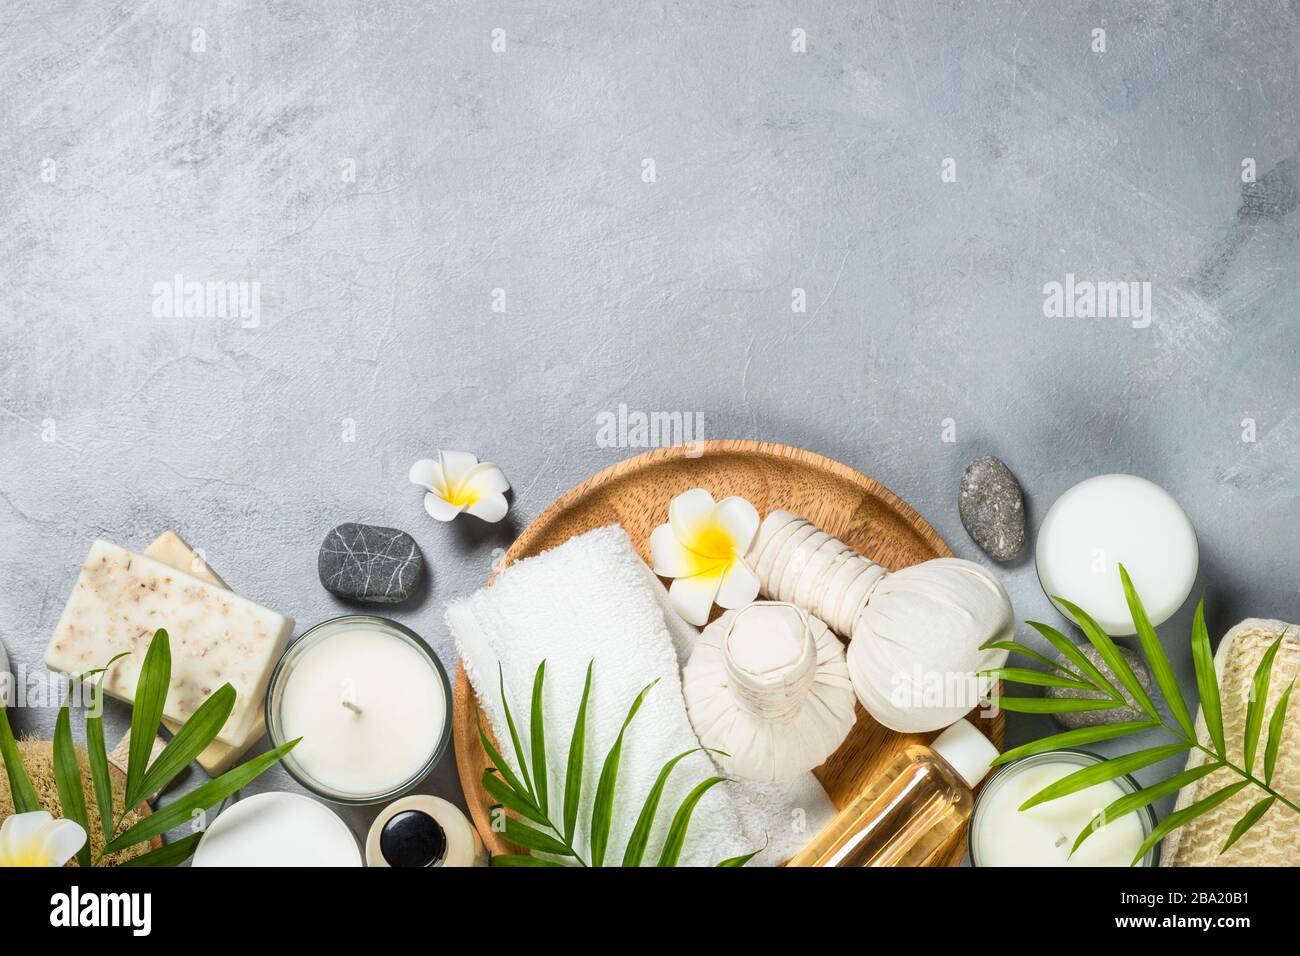 Spa product Flat lay background. Stock Photo